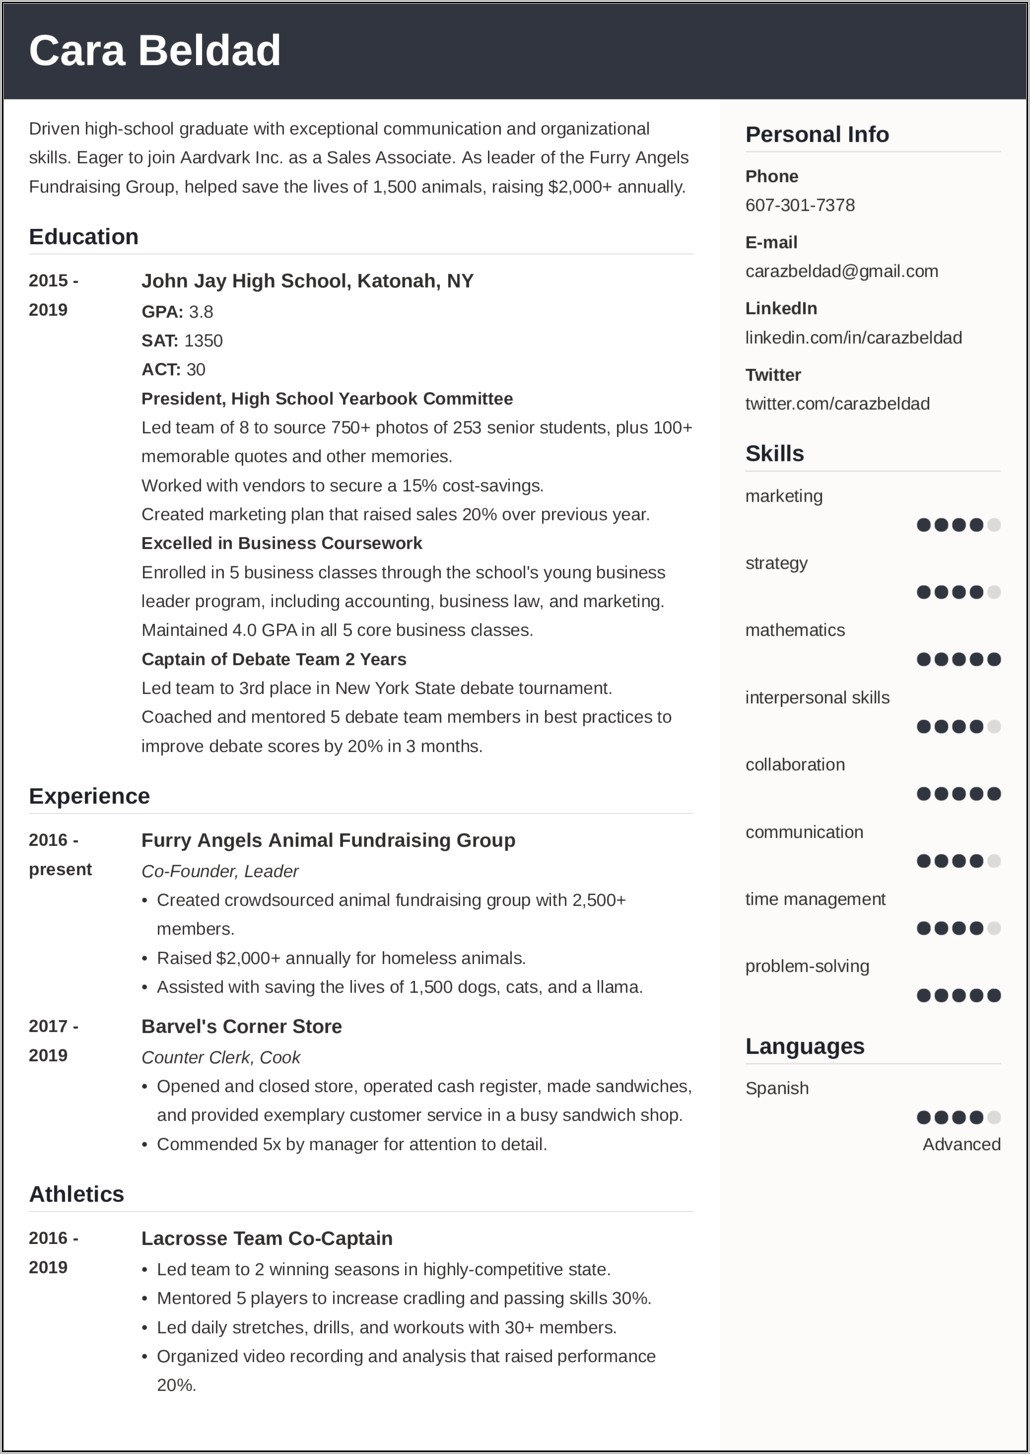 Resume Ideas For Going To A High School